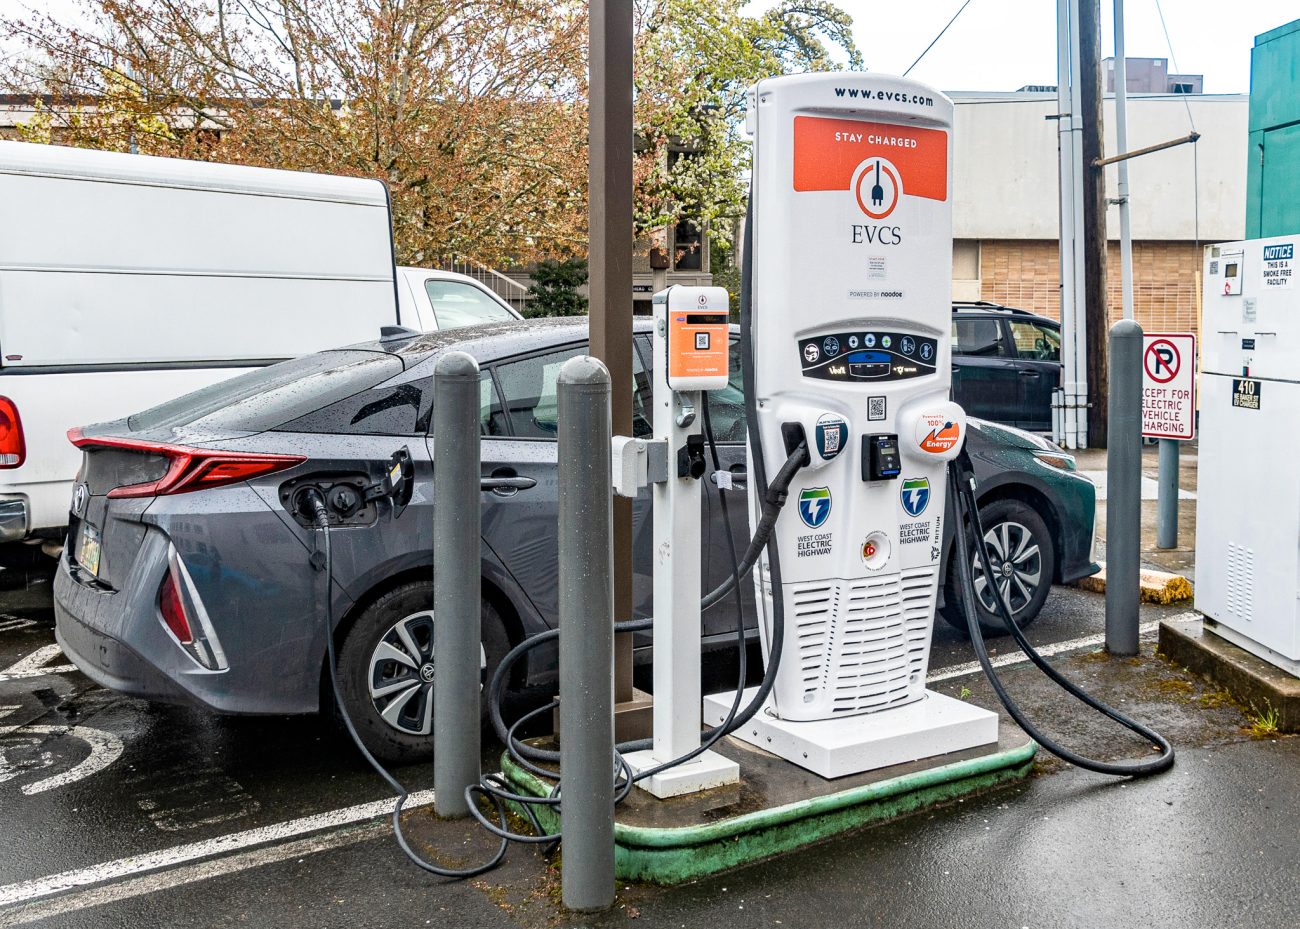 EVCS Seeks $20 Million In Funding To Expand Electric Vehicle Charging Network